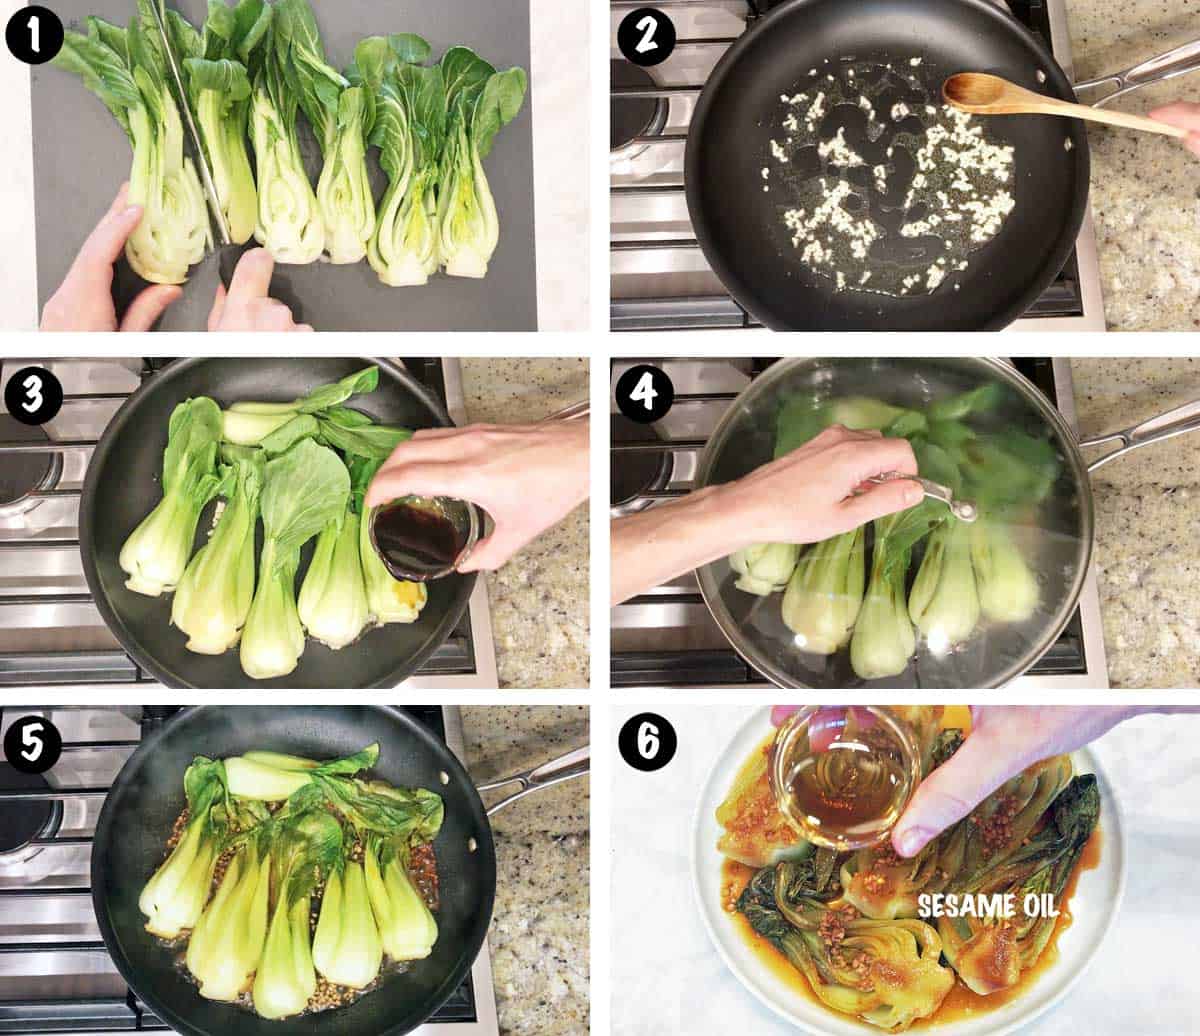 A six-photo collage showing the steps for cooking bok choy. 